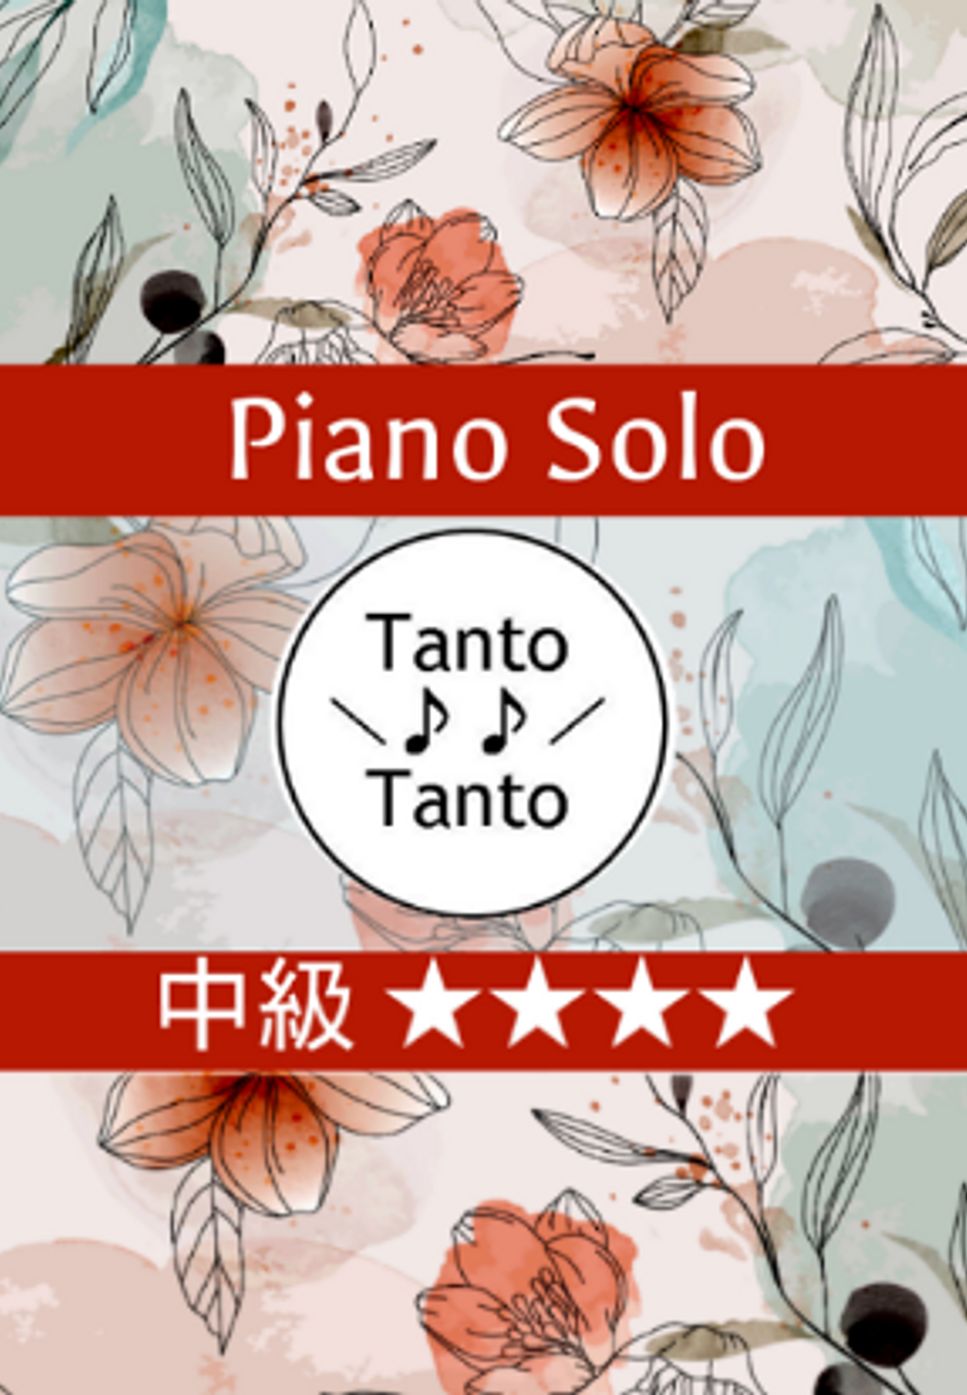 Groovy Old MacDonald Had a Farm ゆかいな牧場 (Piano Solo in E♭) by Tanto Tanto